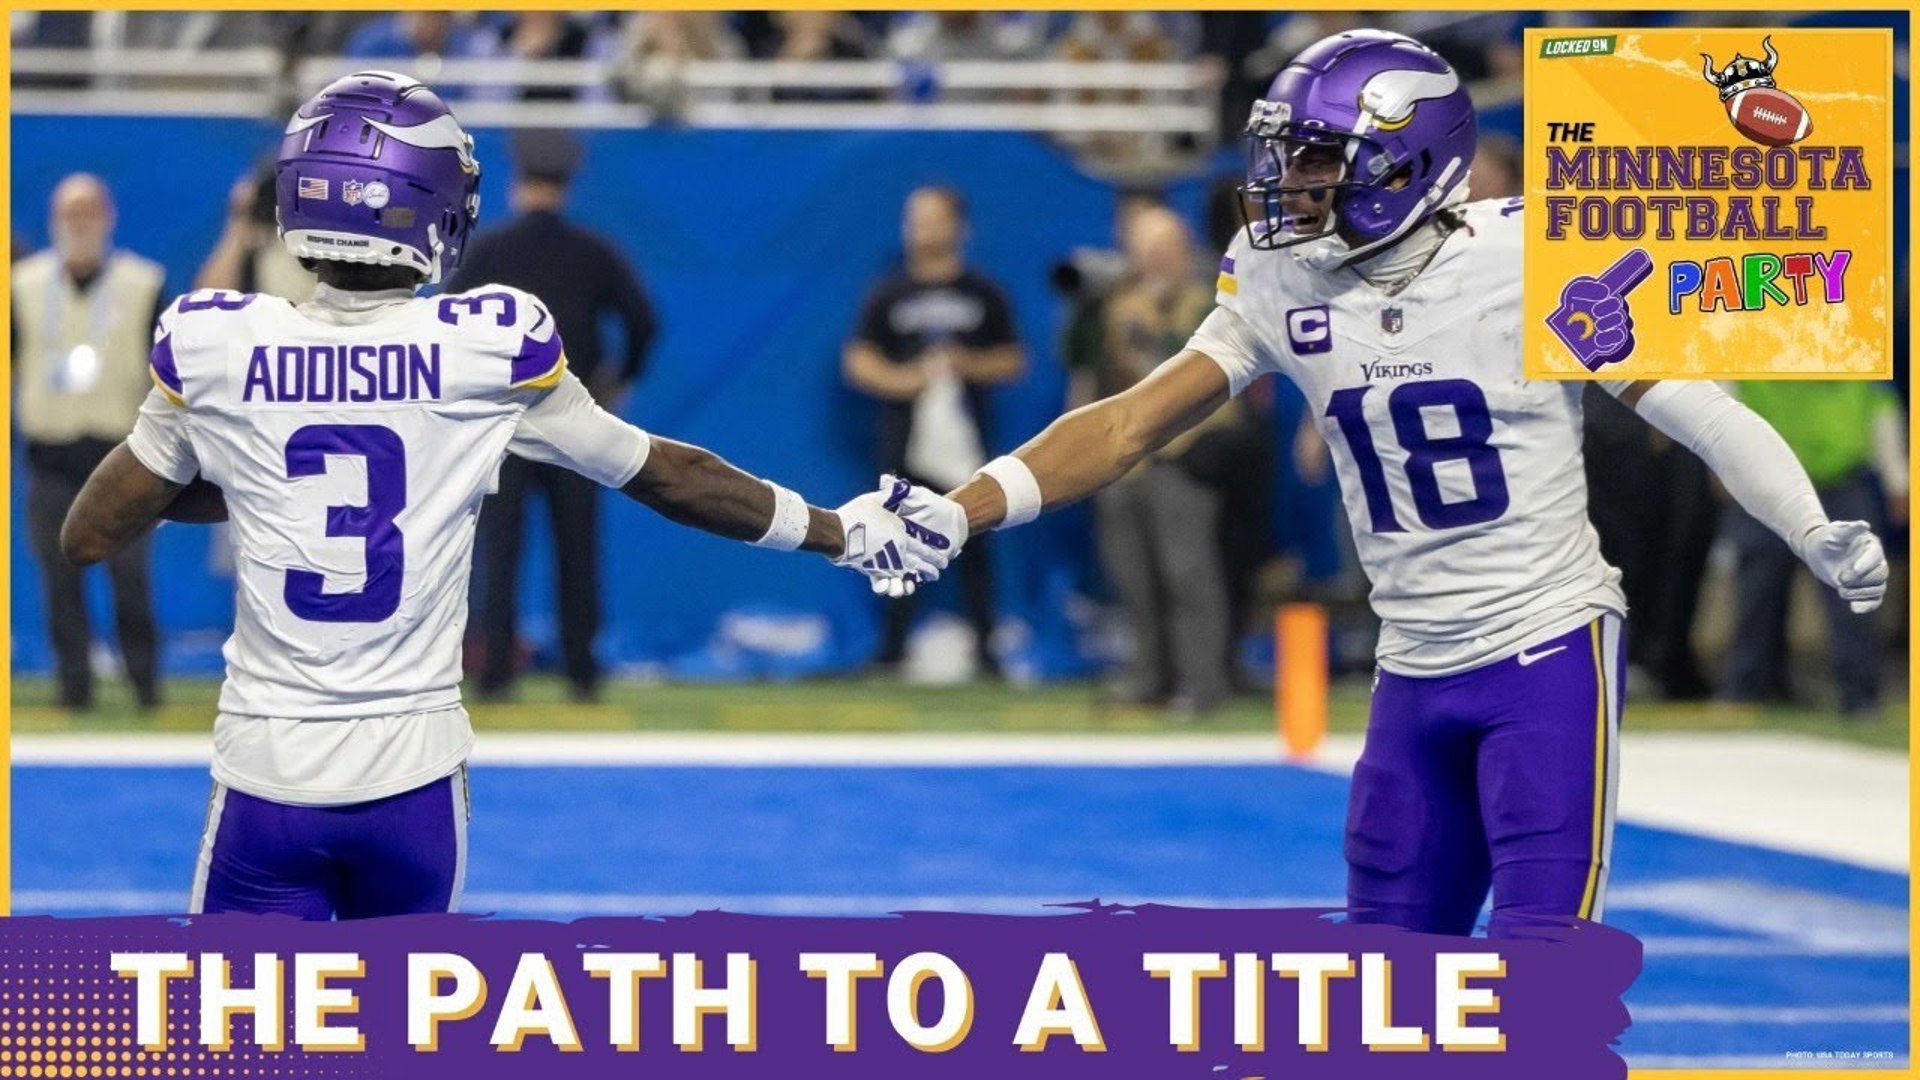 How the Minnesota Vikings Can WIN the Super Bowl - The Minnesota Football Party